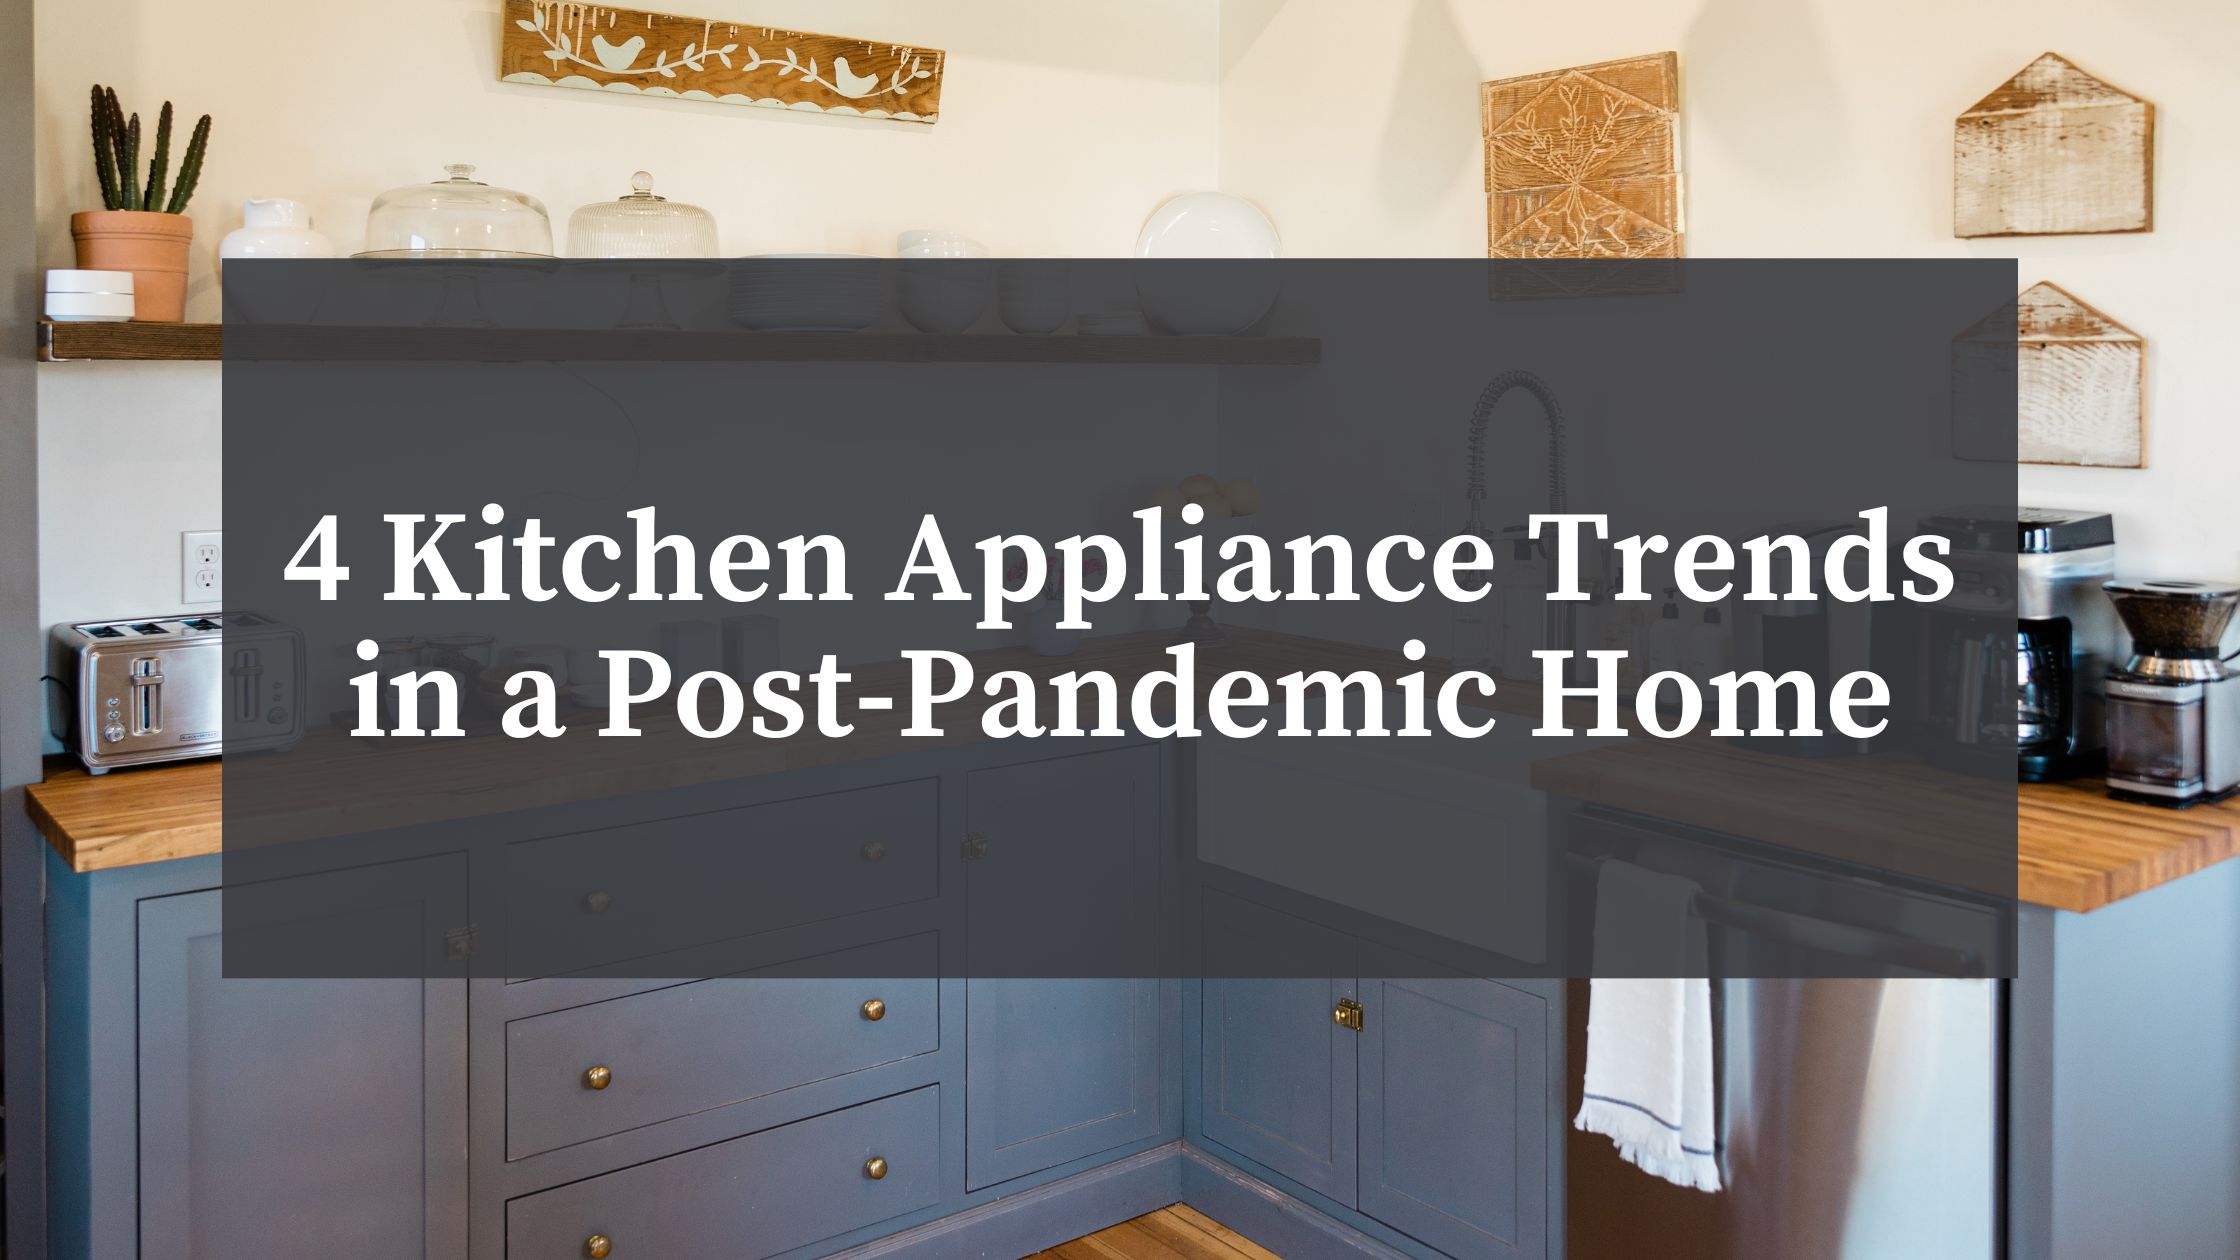 https://blog.bscculinary.com/wp-content/uploads/2022/10/4-Kitchen-Appliance-Trends-in-a-Post-Pandemic-Home-BSC.jpg